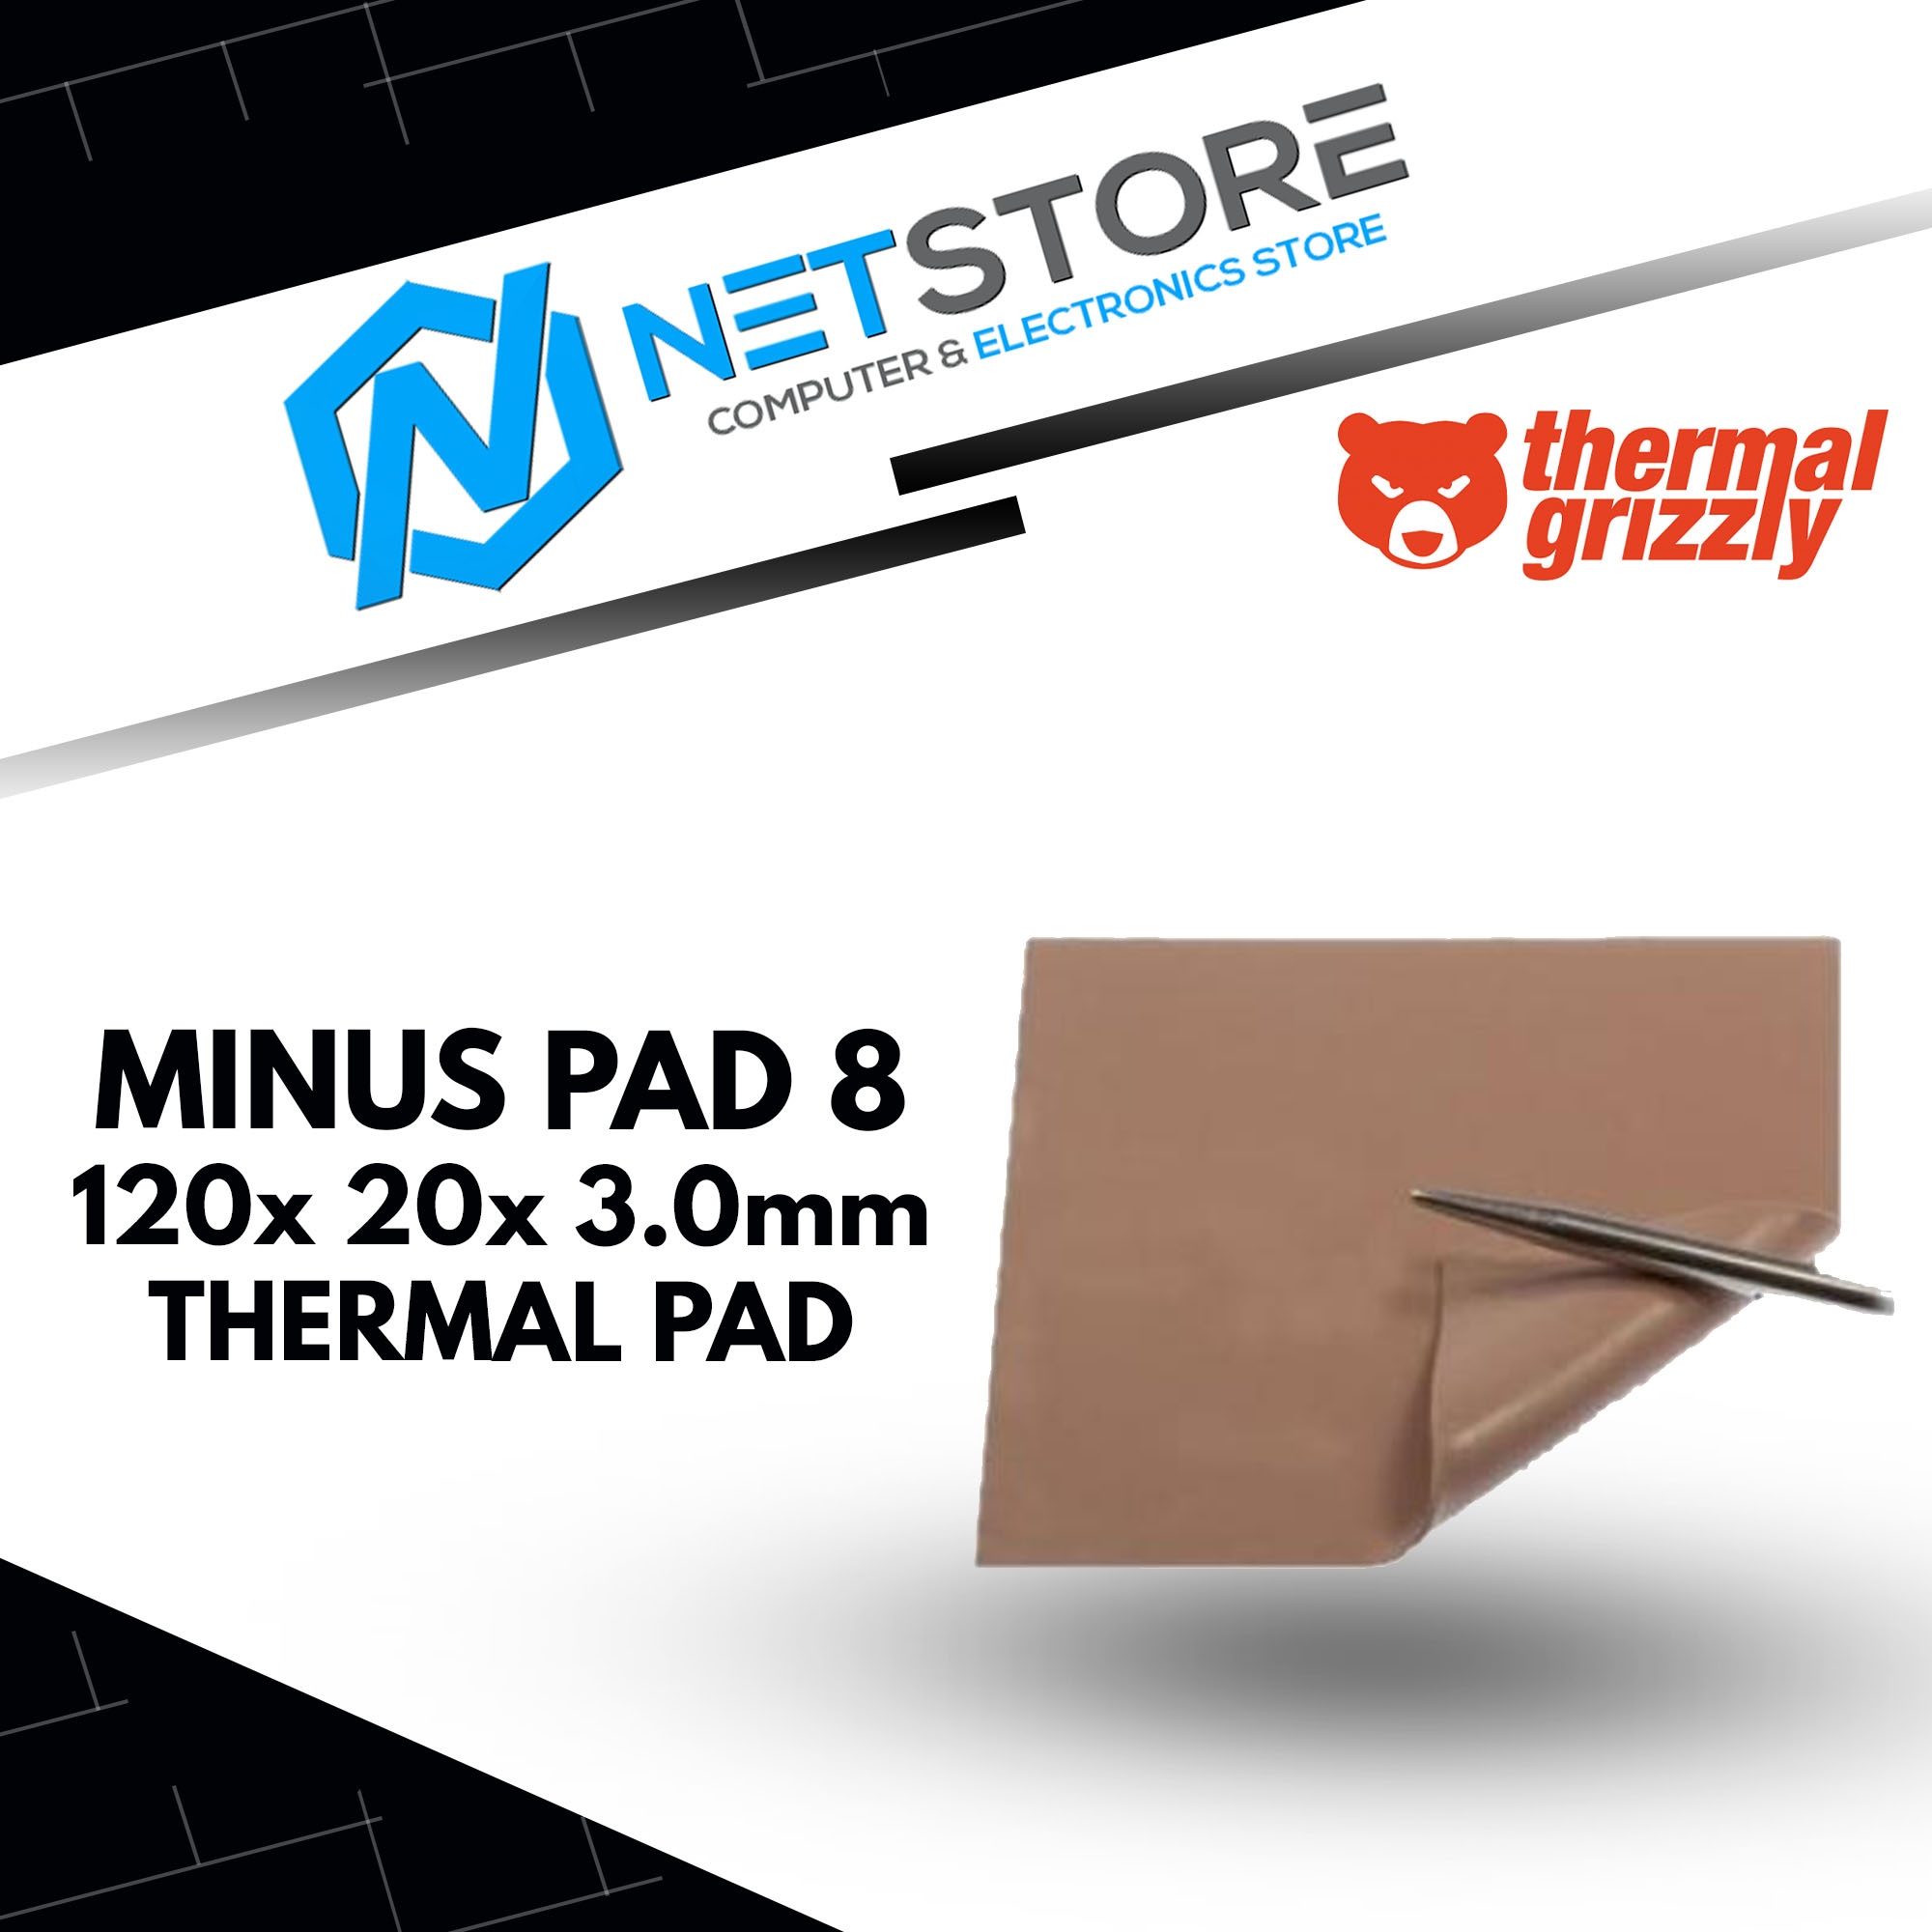 THERMAL GRIZZLY MINUS PAD 8 120x 20x 3.0mm THERMAL PAD